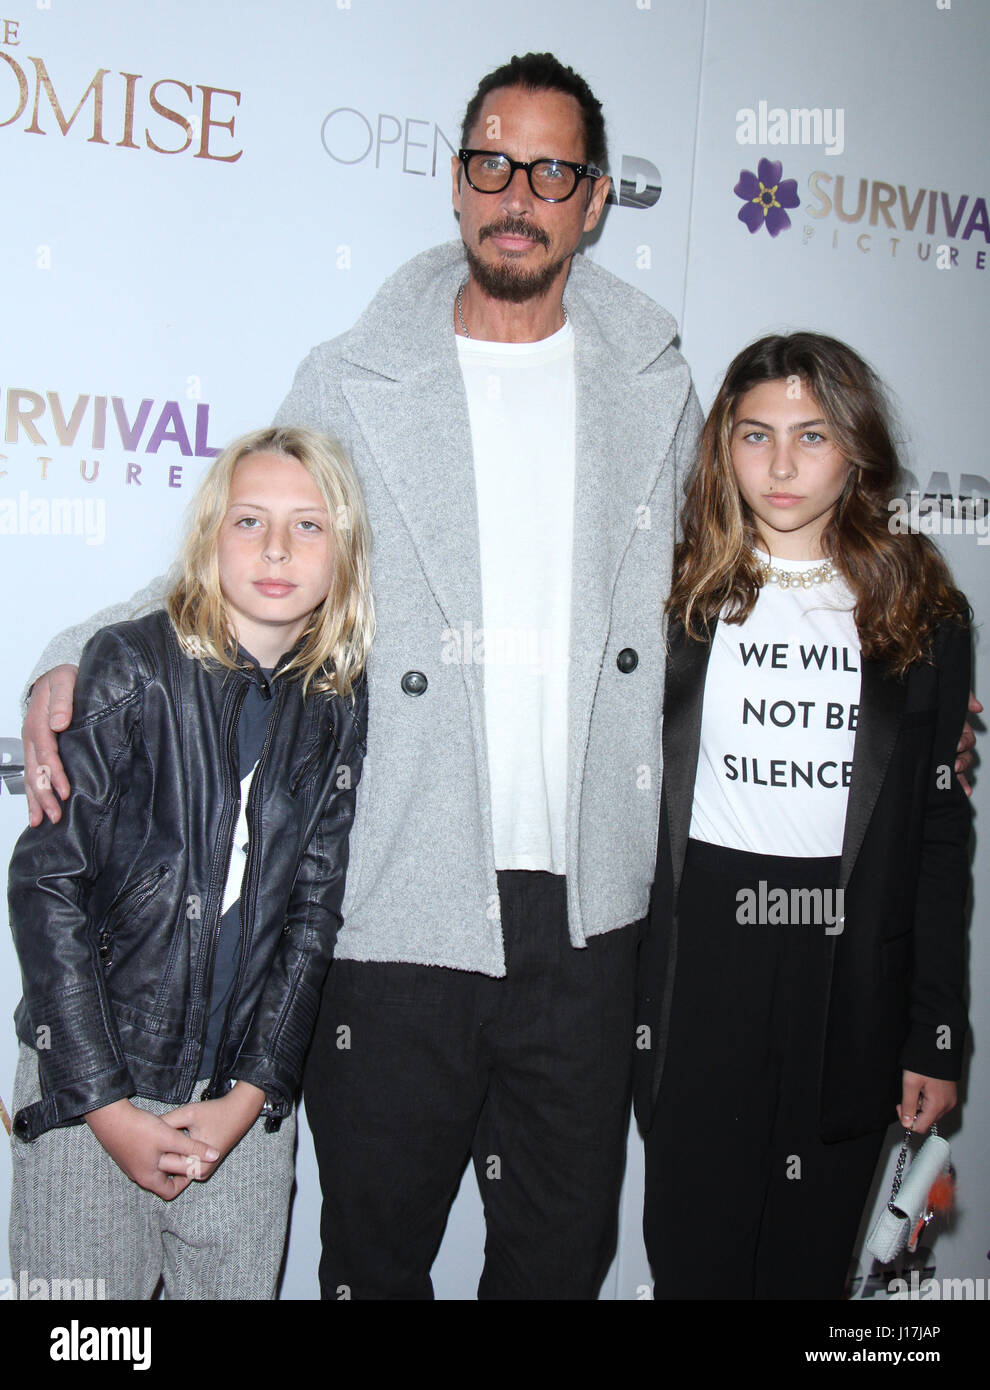 New York, USA. 18th Apr, 2017. Toni Cornell, Chris Cornell, Lilian Jean  Cornell attend Survival Pictures and Open Road in partnership with  Ambassador Zohrab Mnatsakanyan, Permanent Representative of Armenia to the  United